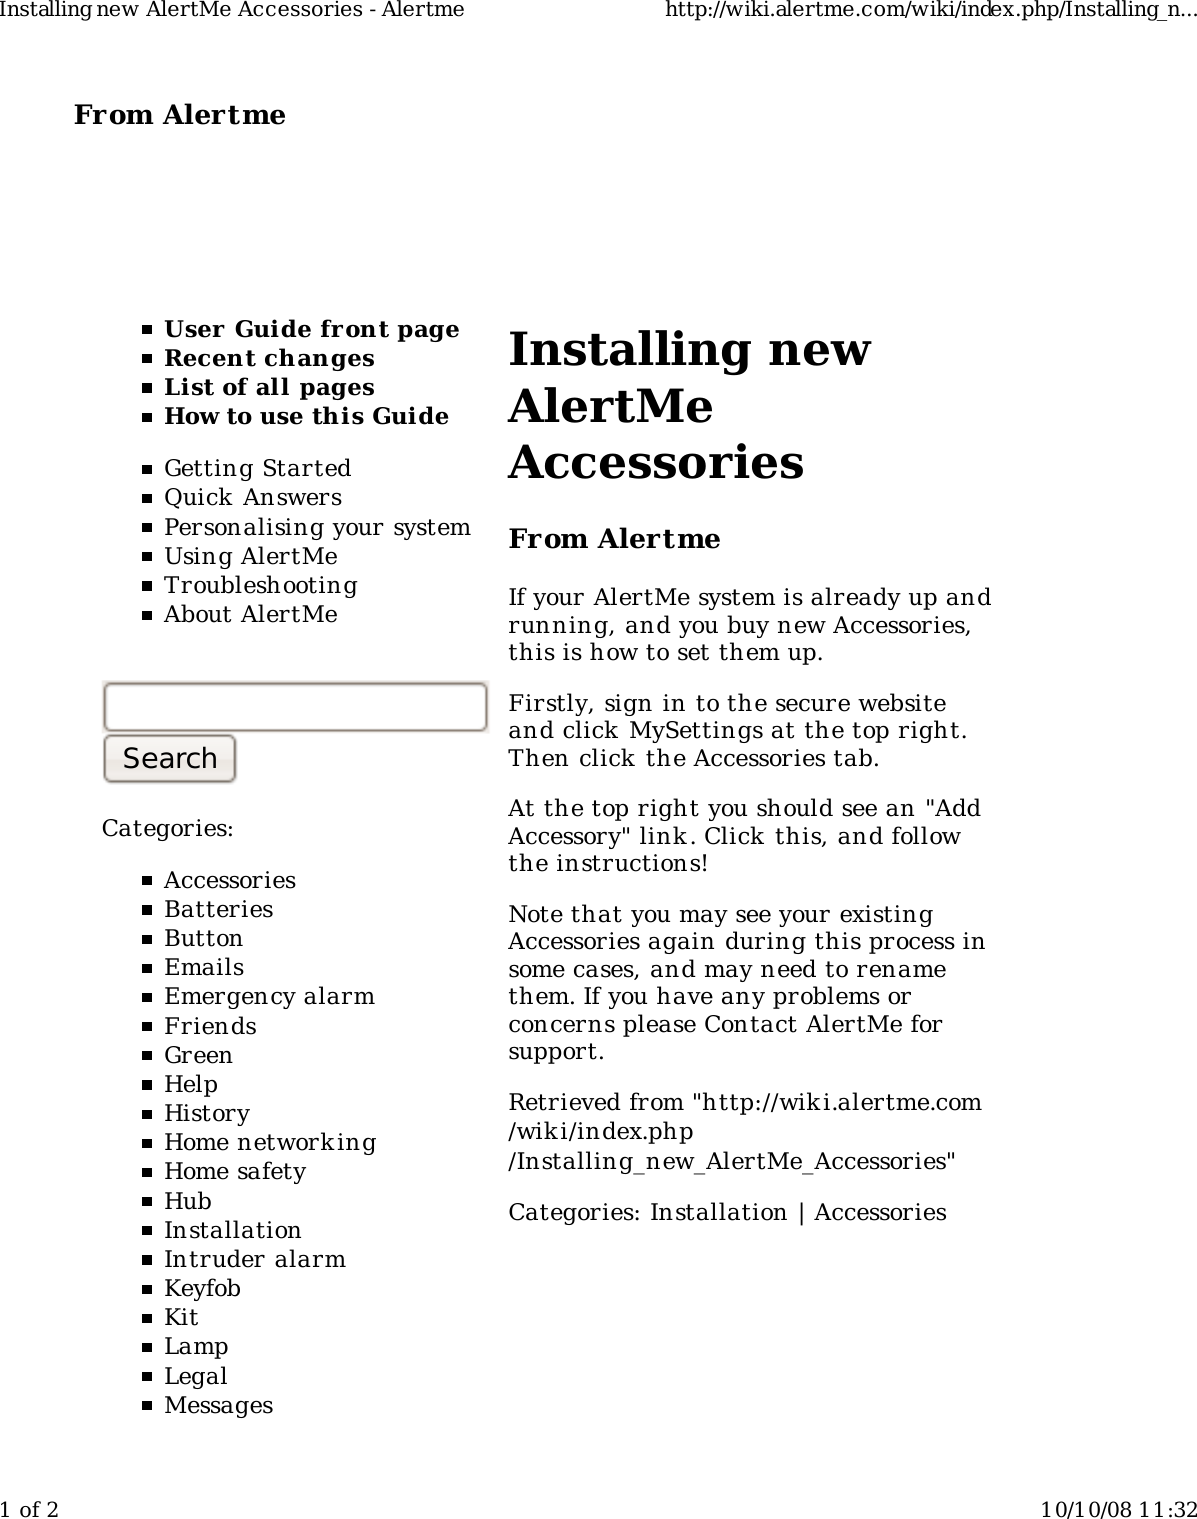 From Alertme  User Guide front pageRecent changesList of all pagesHow to use this GuideGetting StartedQuick AnswersPersonalising your systemUsing AlertMeTroubleshootingAbout AlertMeCategories:AccessoriesBatteriesButtonEmailsEmergency alarmFriendsGreenHelpHistoryHome network ingHome safetyHubInstallationIntruder alarmKeyfobKitLampLegalMessagesInstalling newAlertMeAccessoriesFrom AlertmeIf your AlertMe system is already up andrunning, and you buy new Accessories,this is how to set them up.Firstly, sign in to the secure websiteand click MySettings at the top right.Then click the Accessories tab.At the top right you should see an &quot;AddAccessory&quot; link. Click this, and followthe instructions!Note that you may see your existingAccessories again during this process insome cases, and may need to renamethem. If you have any problems orconcerns please Contact AlertMe forsupport.Retrieved from &quot;http://wiki.alertme.com/wik i/index.php/Installing_new_AlertMe_Accessories&quot;Categories: Installation | AccessoriesInstalling new AlertMe Accessories - Alertme http://wiki.alertme.com/wiki/index.php/Installing_n...1 of 2 10/10/08 11:32